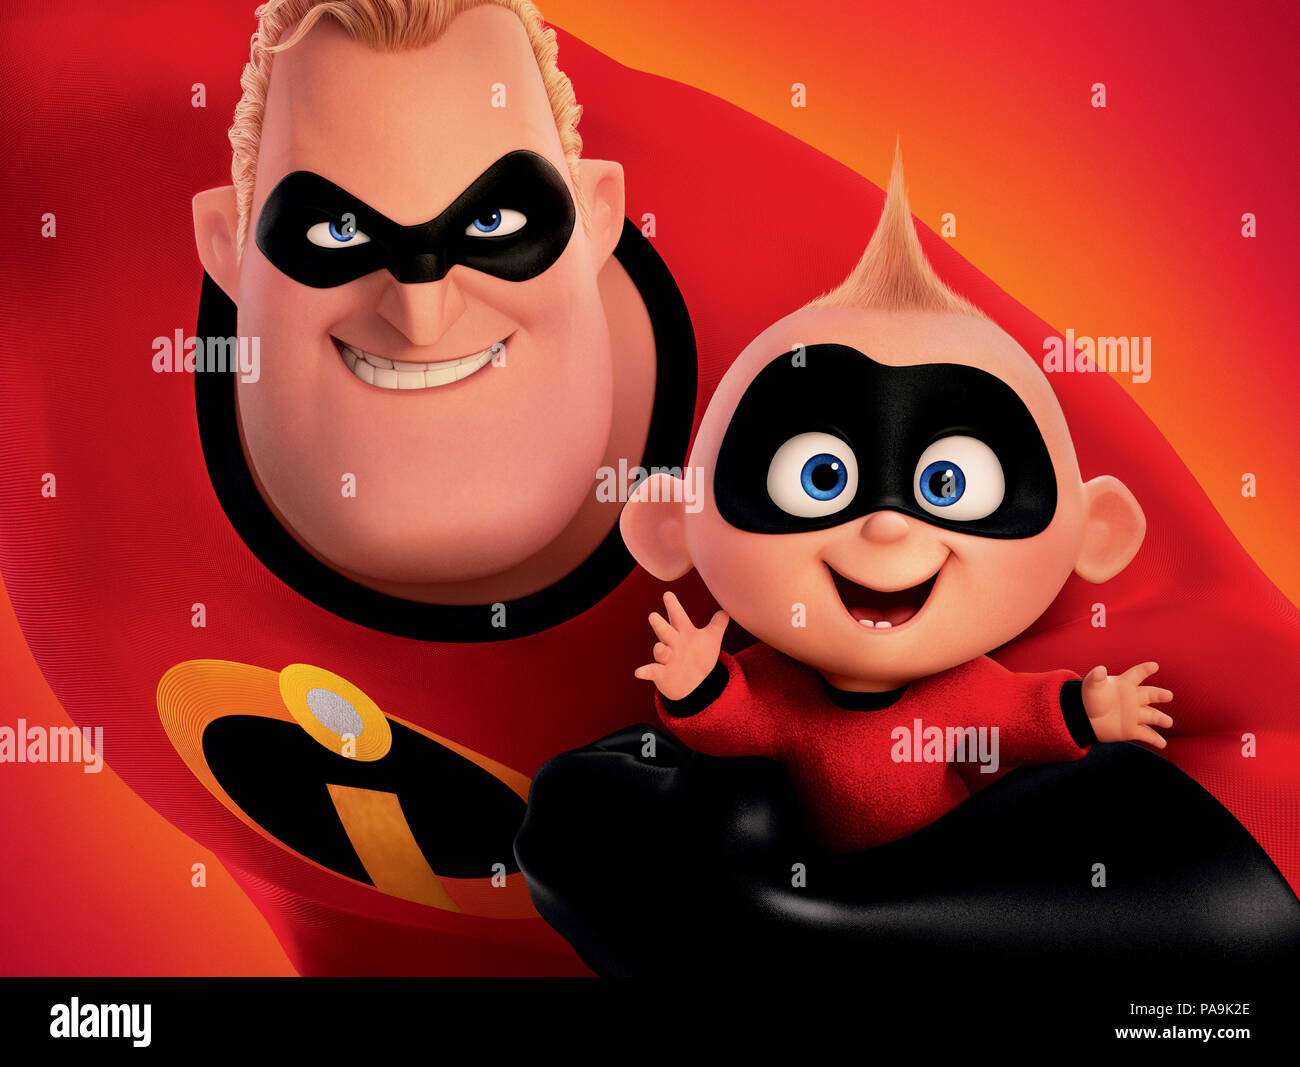 RELEASE DATE: June 15, 2018 TITLE: Incredibles 2 STUDIO: Pixar DIRECTOR: Brad Bird PLOT: Bob Parr (Mr. Incredible) is left to care for Jack-Jack while Helen (Elastigirl) is out saving the world. STARRING: Poster art. (Credit Image: © Pixar/Entertainment Pictures) Stock Photo